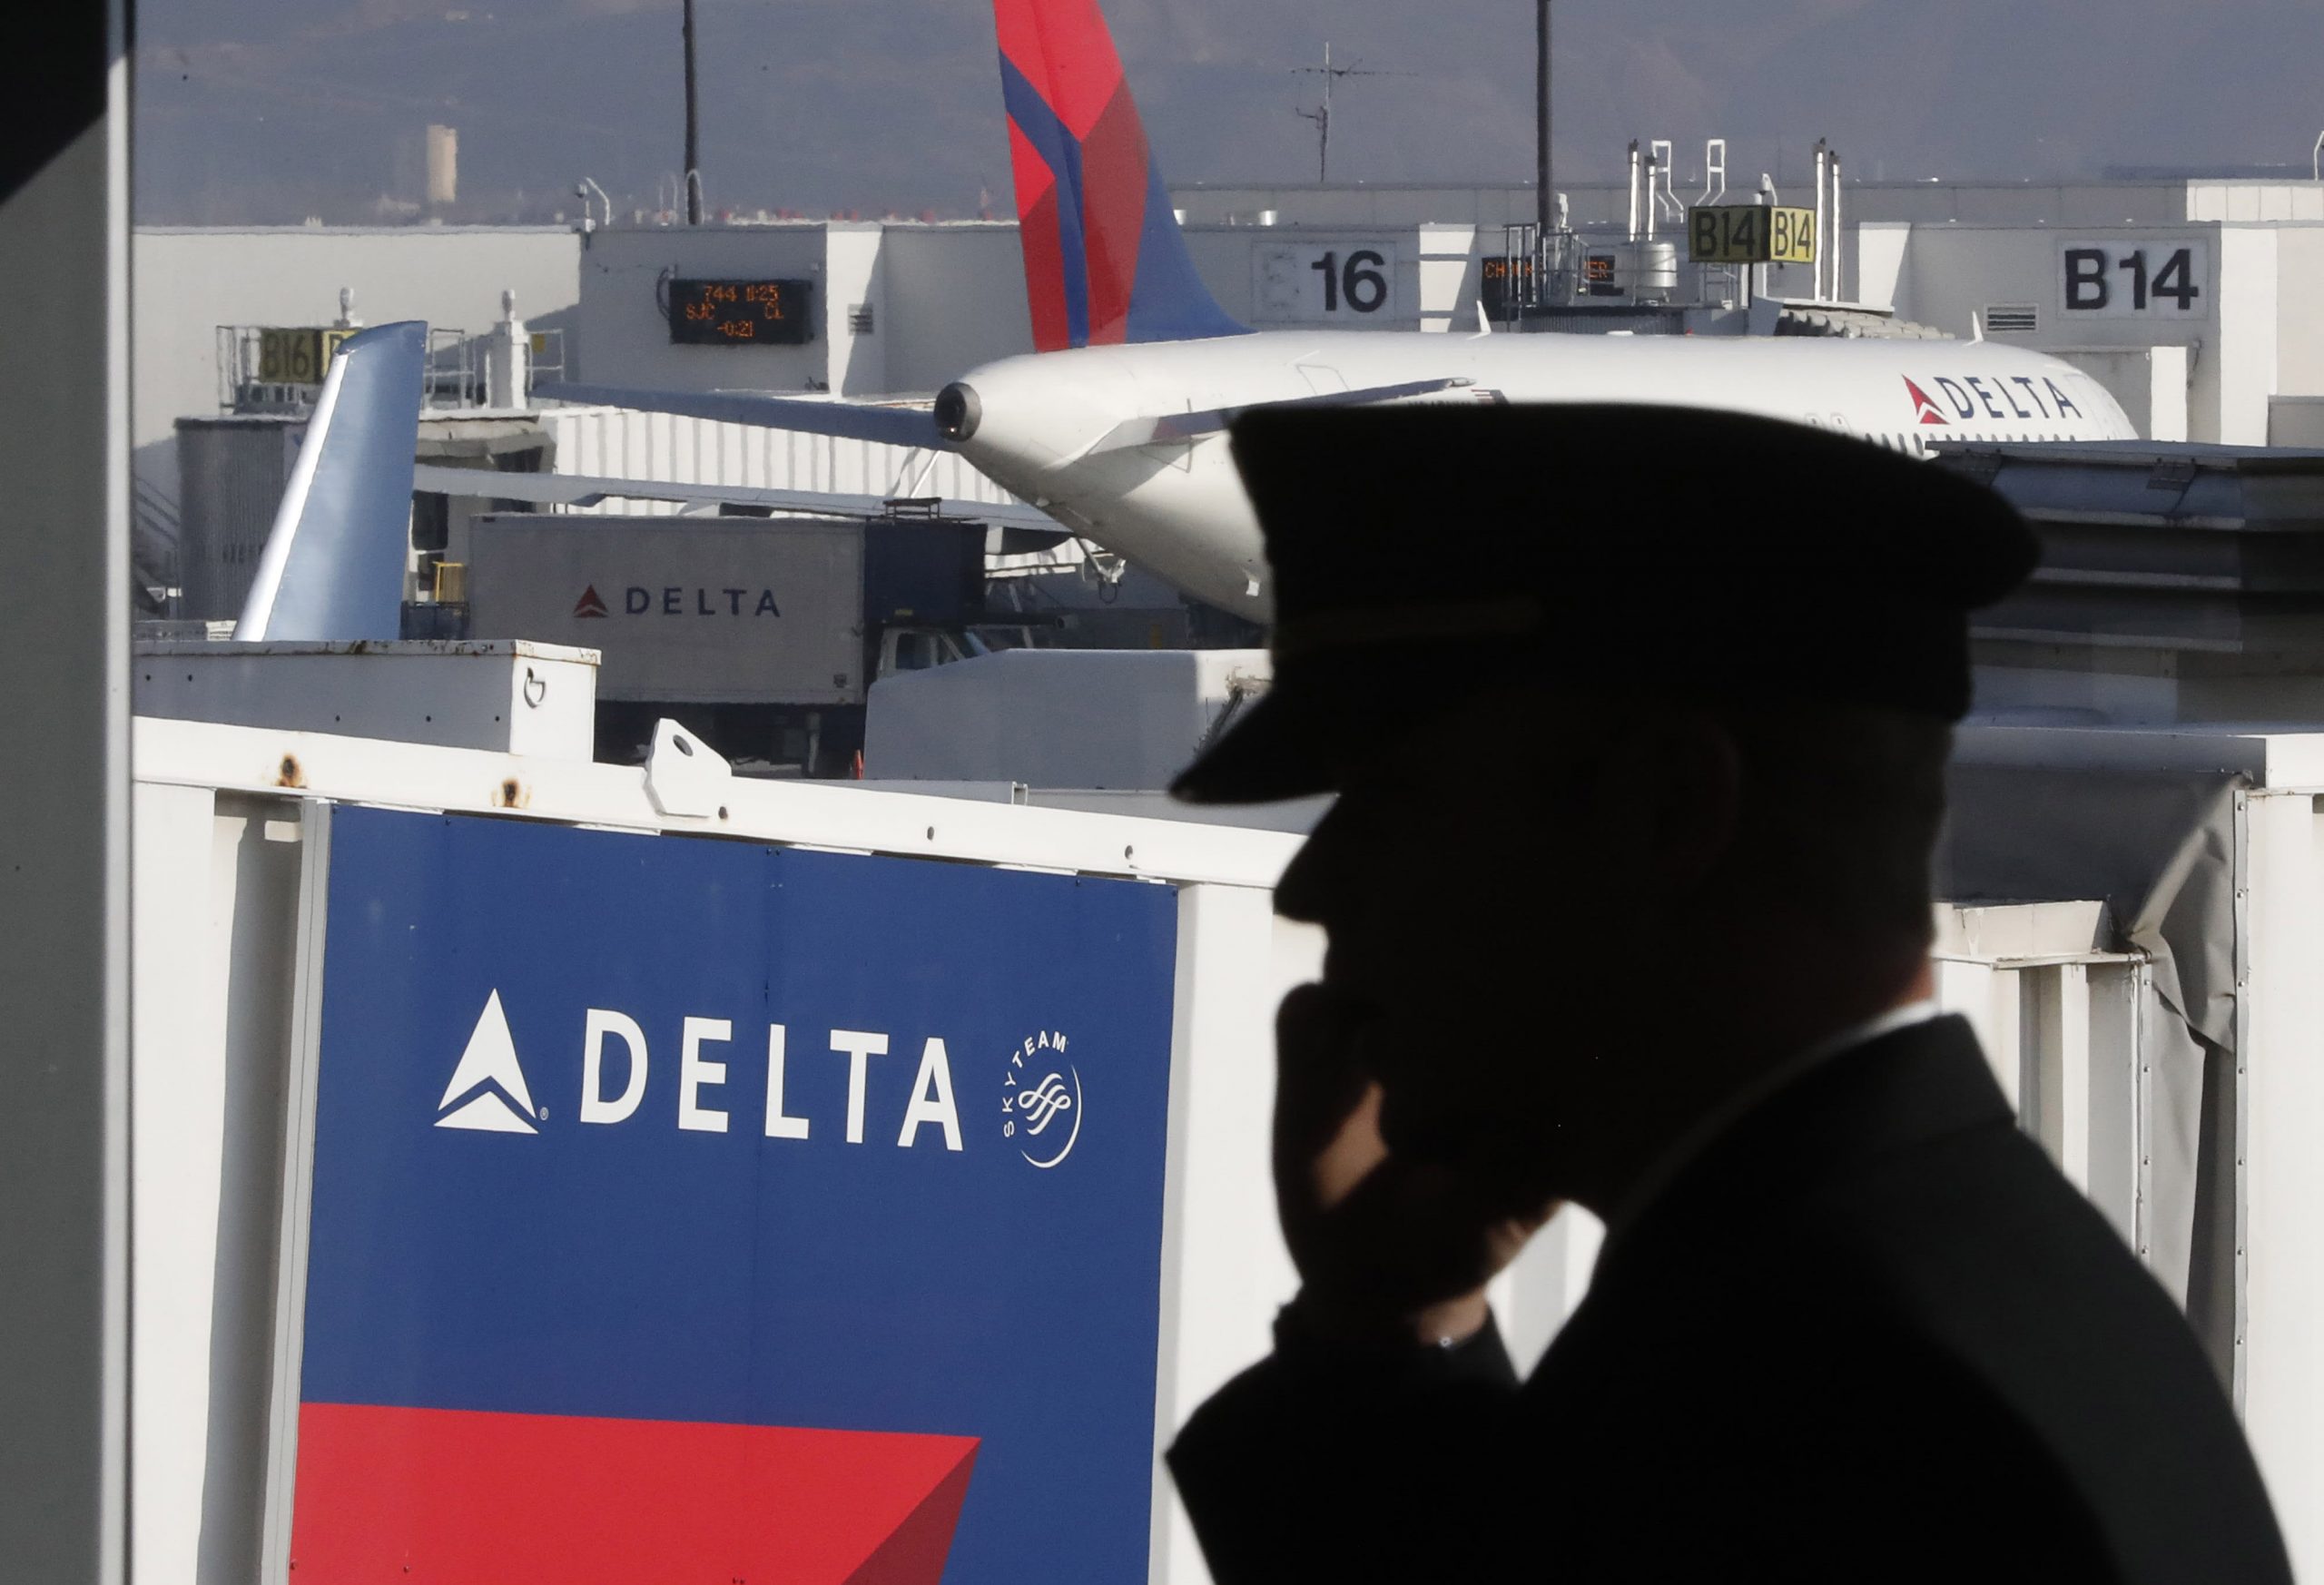 Delta and pilot union reach preliminary deal to avoid furloughs until 2022